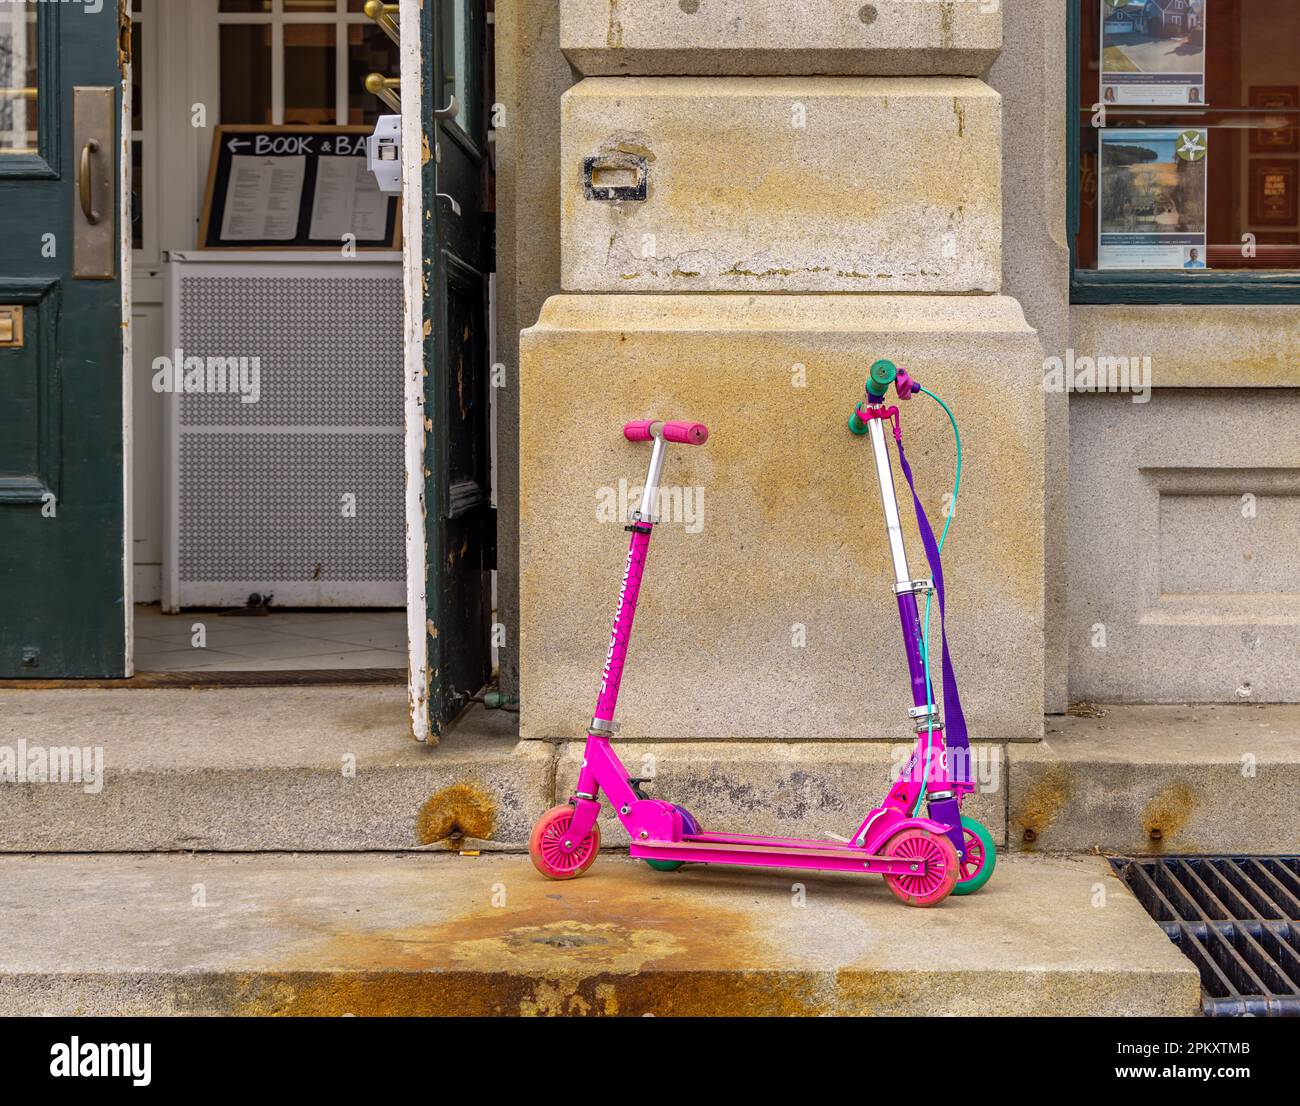 a pair of scooters parked outside a business Stock Photo